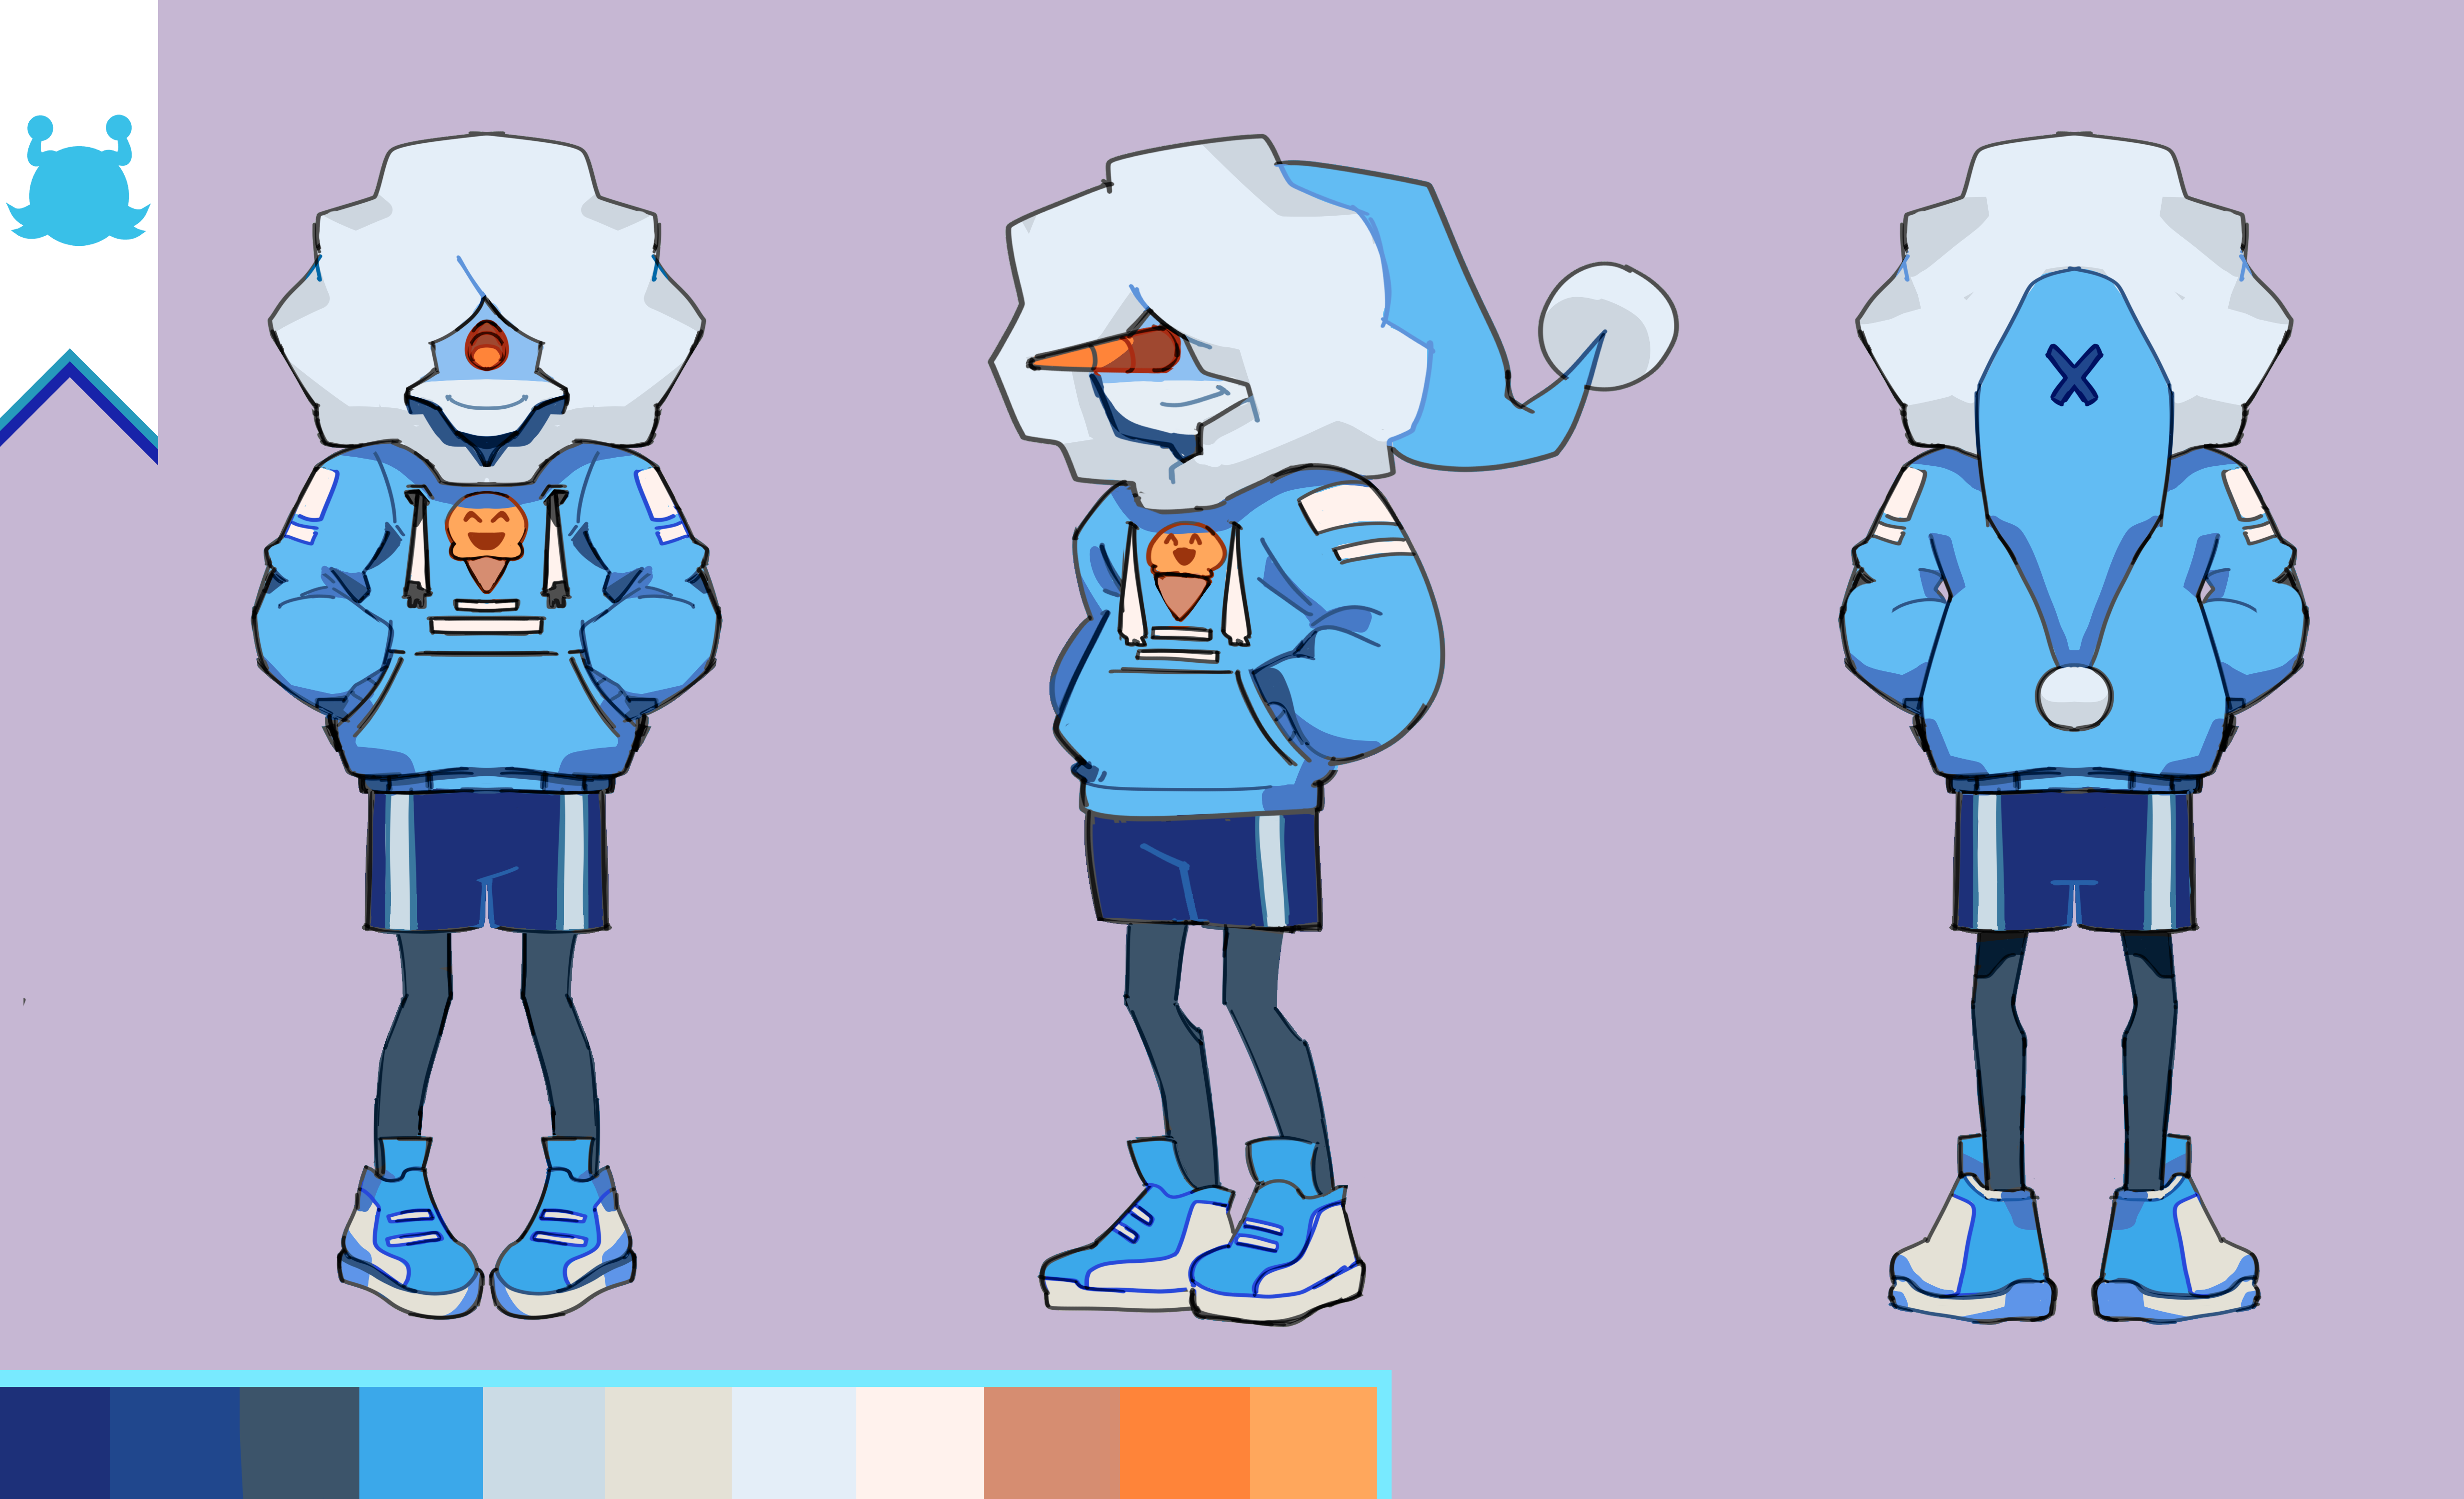 Reference Sheet of my Oc Flake. He is a snowman wearing blue sneakers and a hoodie that has an icecream graphic displayed at the center. The hood covers his eyes.